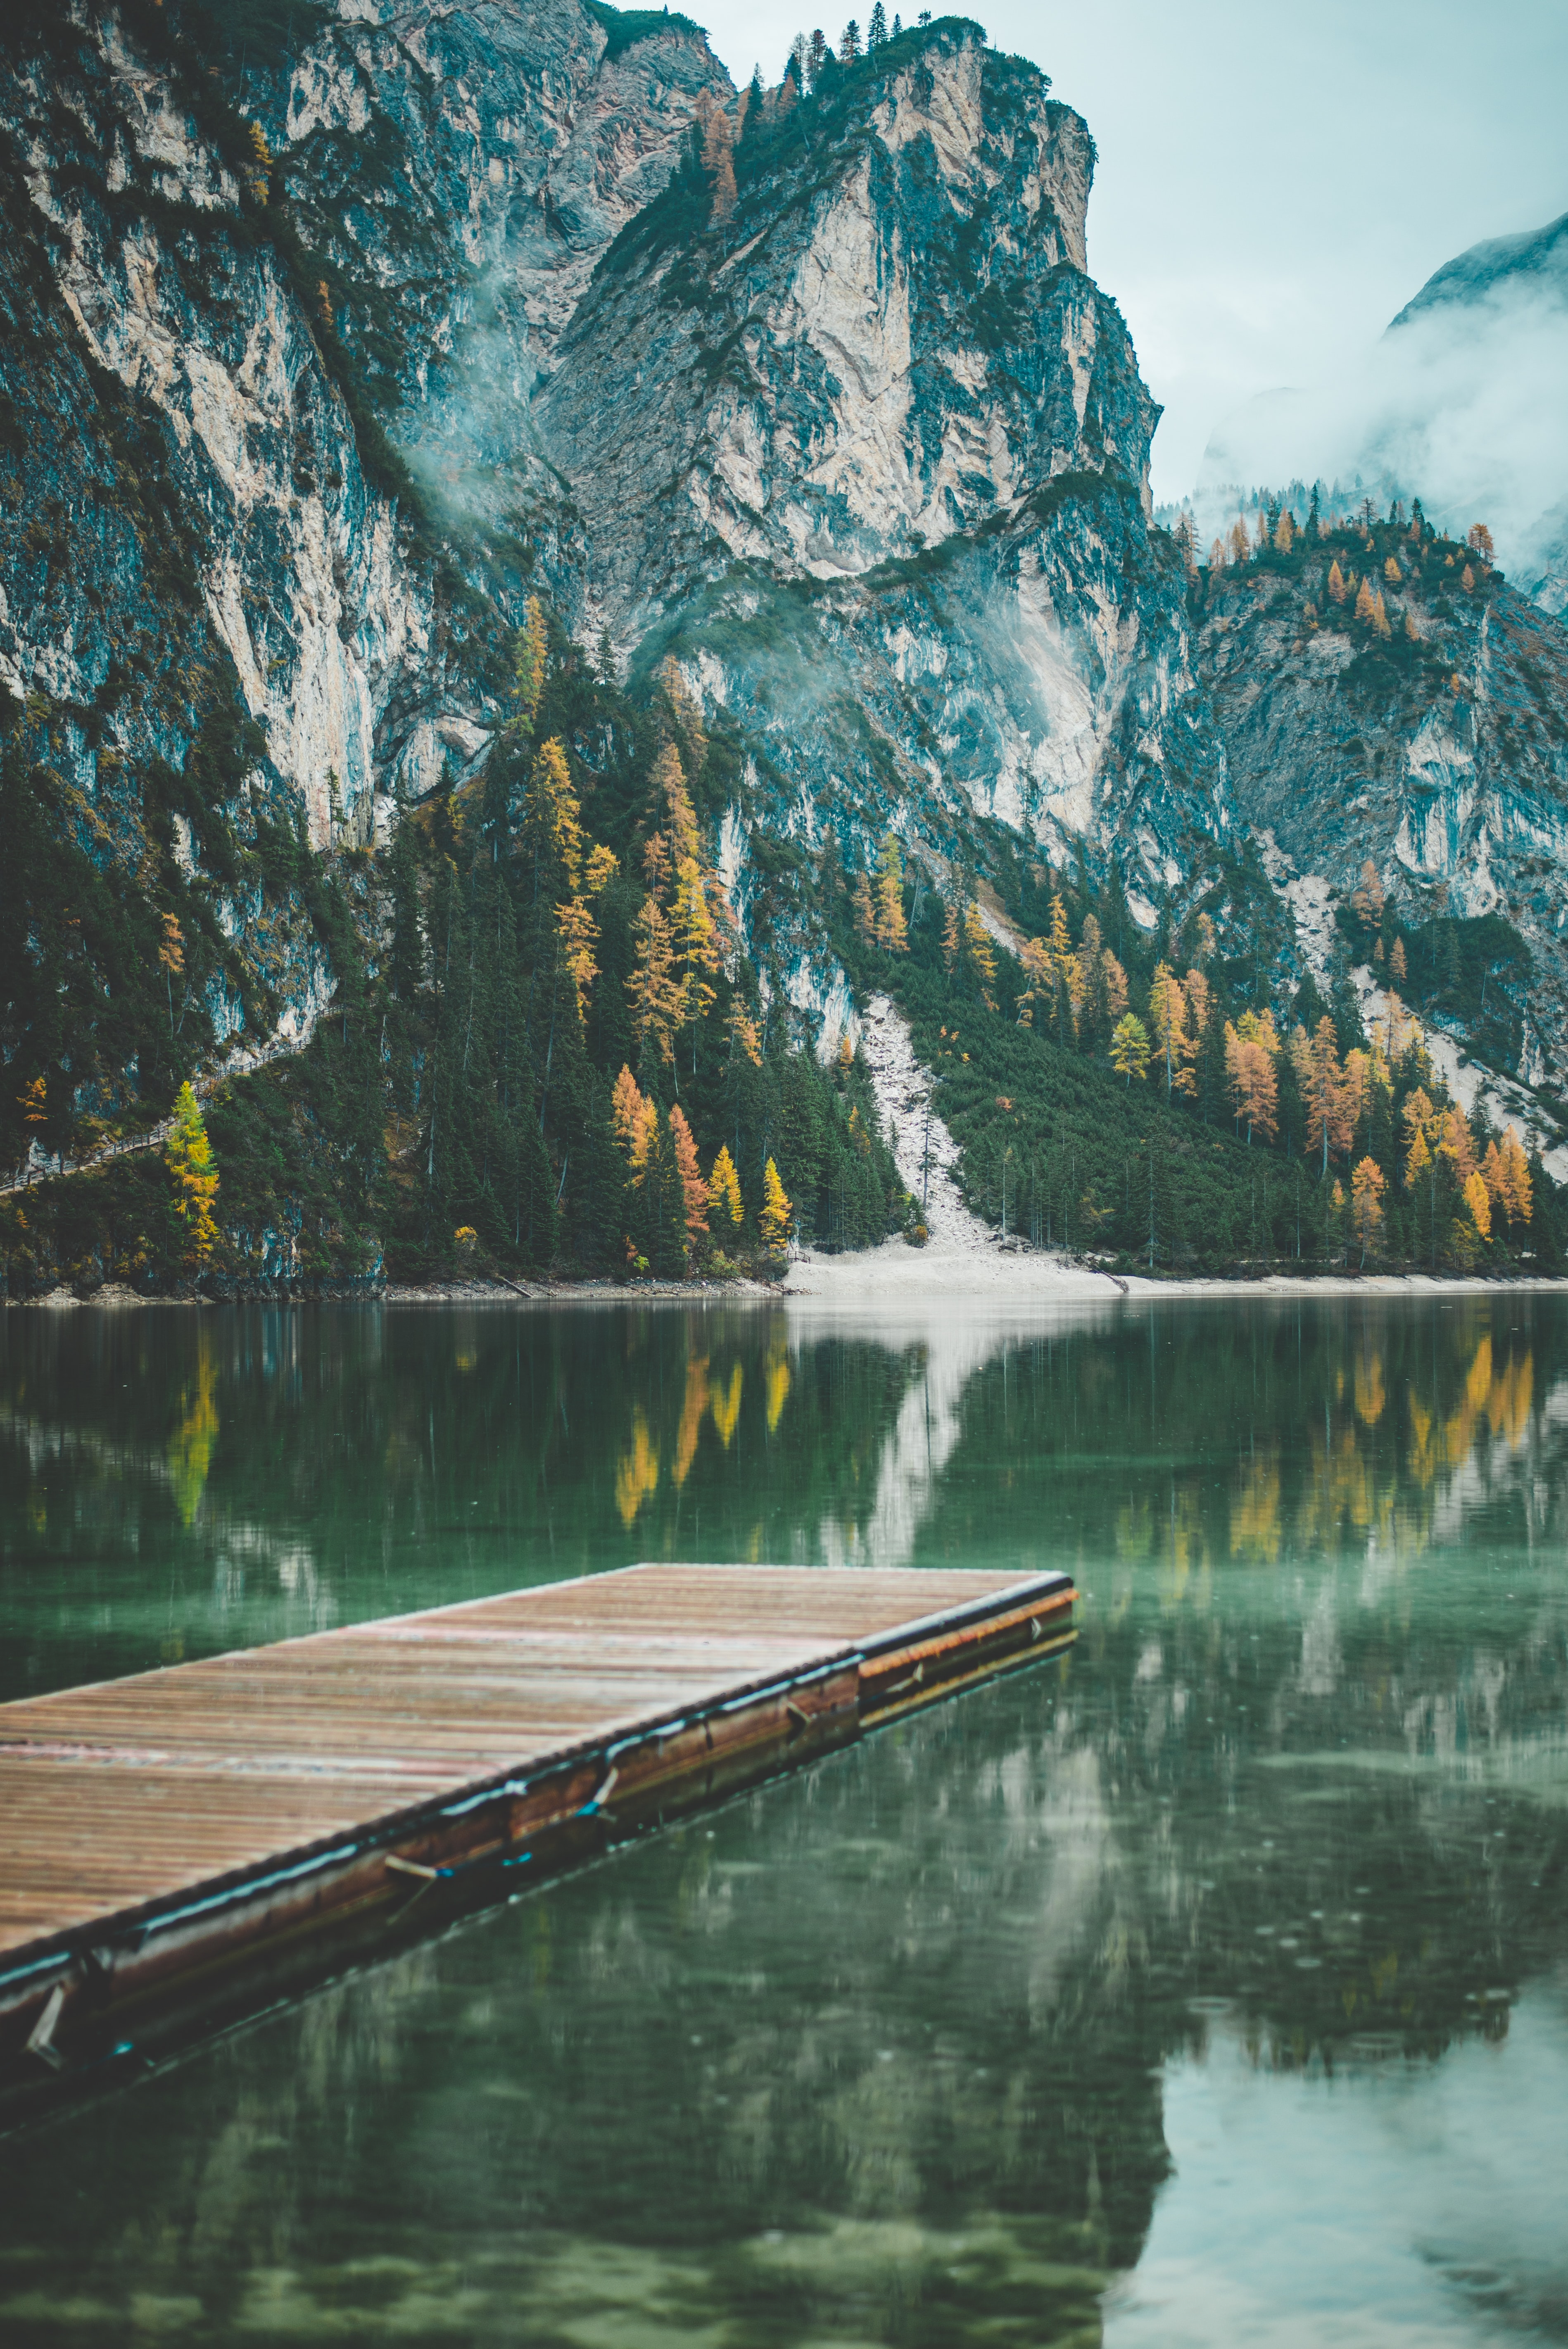 italy, mountains, pier, nature, trees, lake, reflection wallpapers for tablet